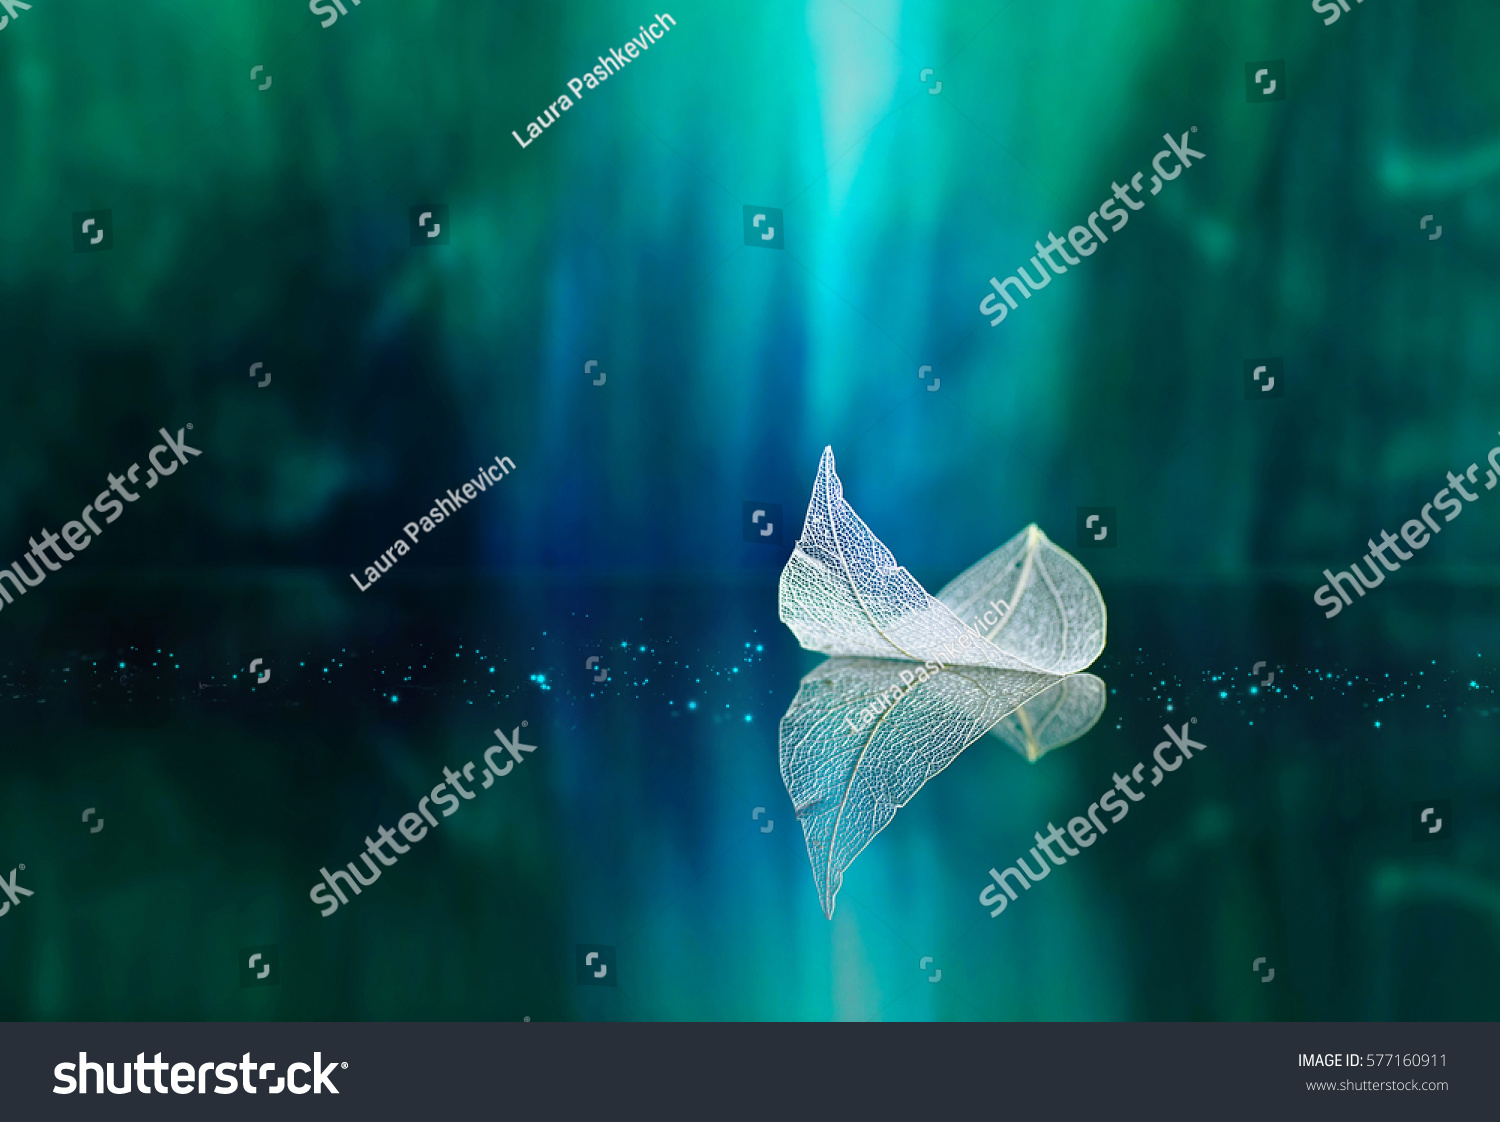 White transparent leaf on mirror surface with reflection on green background macro. Abstract artistic image of ship in waters of lake. Template Border natural dreamy artistic image for traveling #577160911